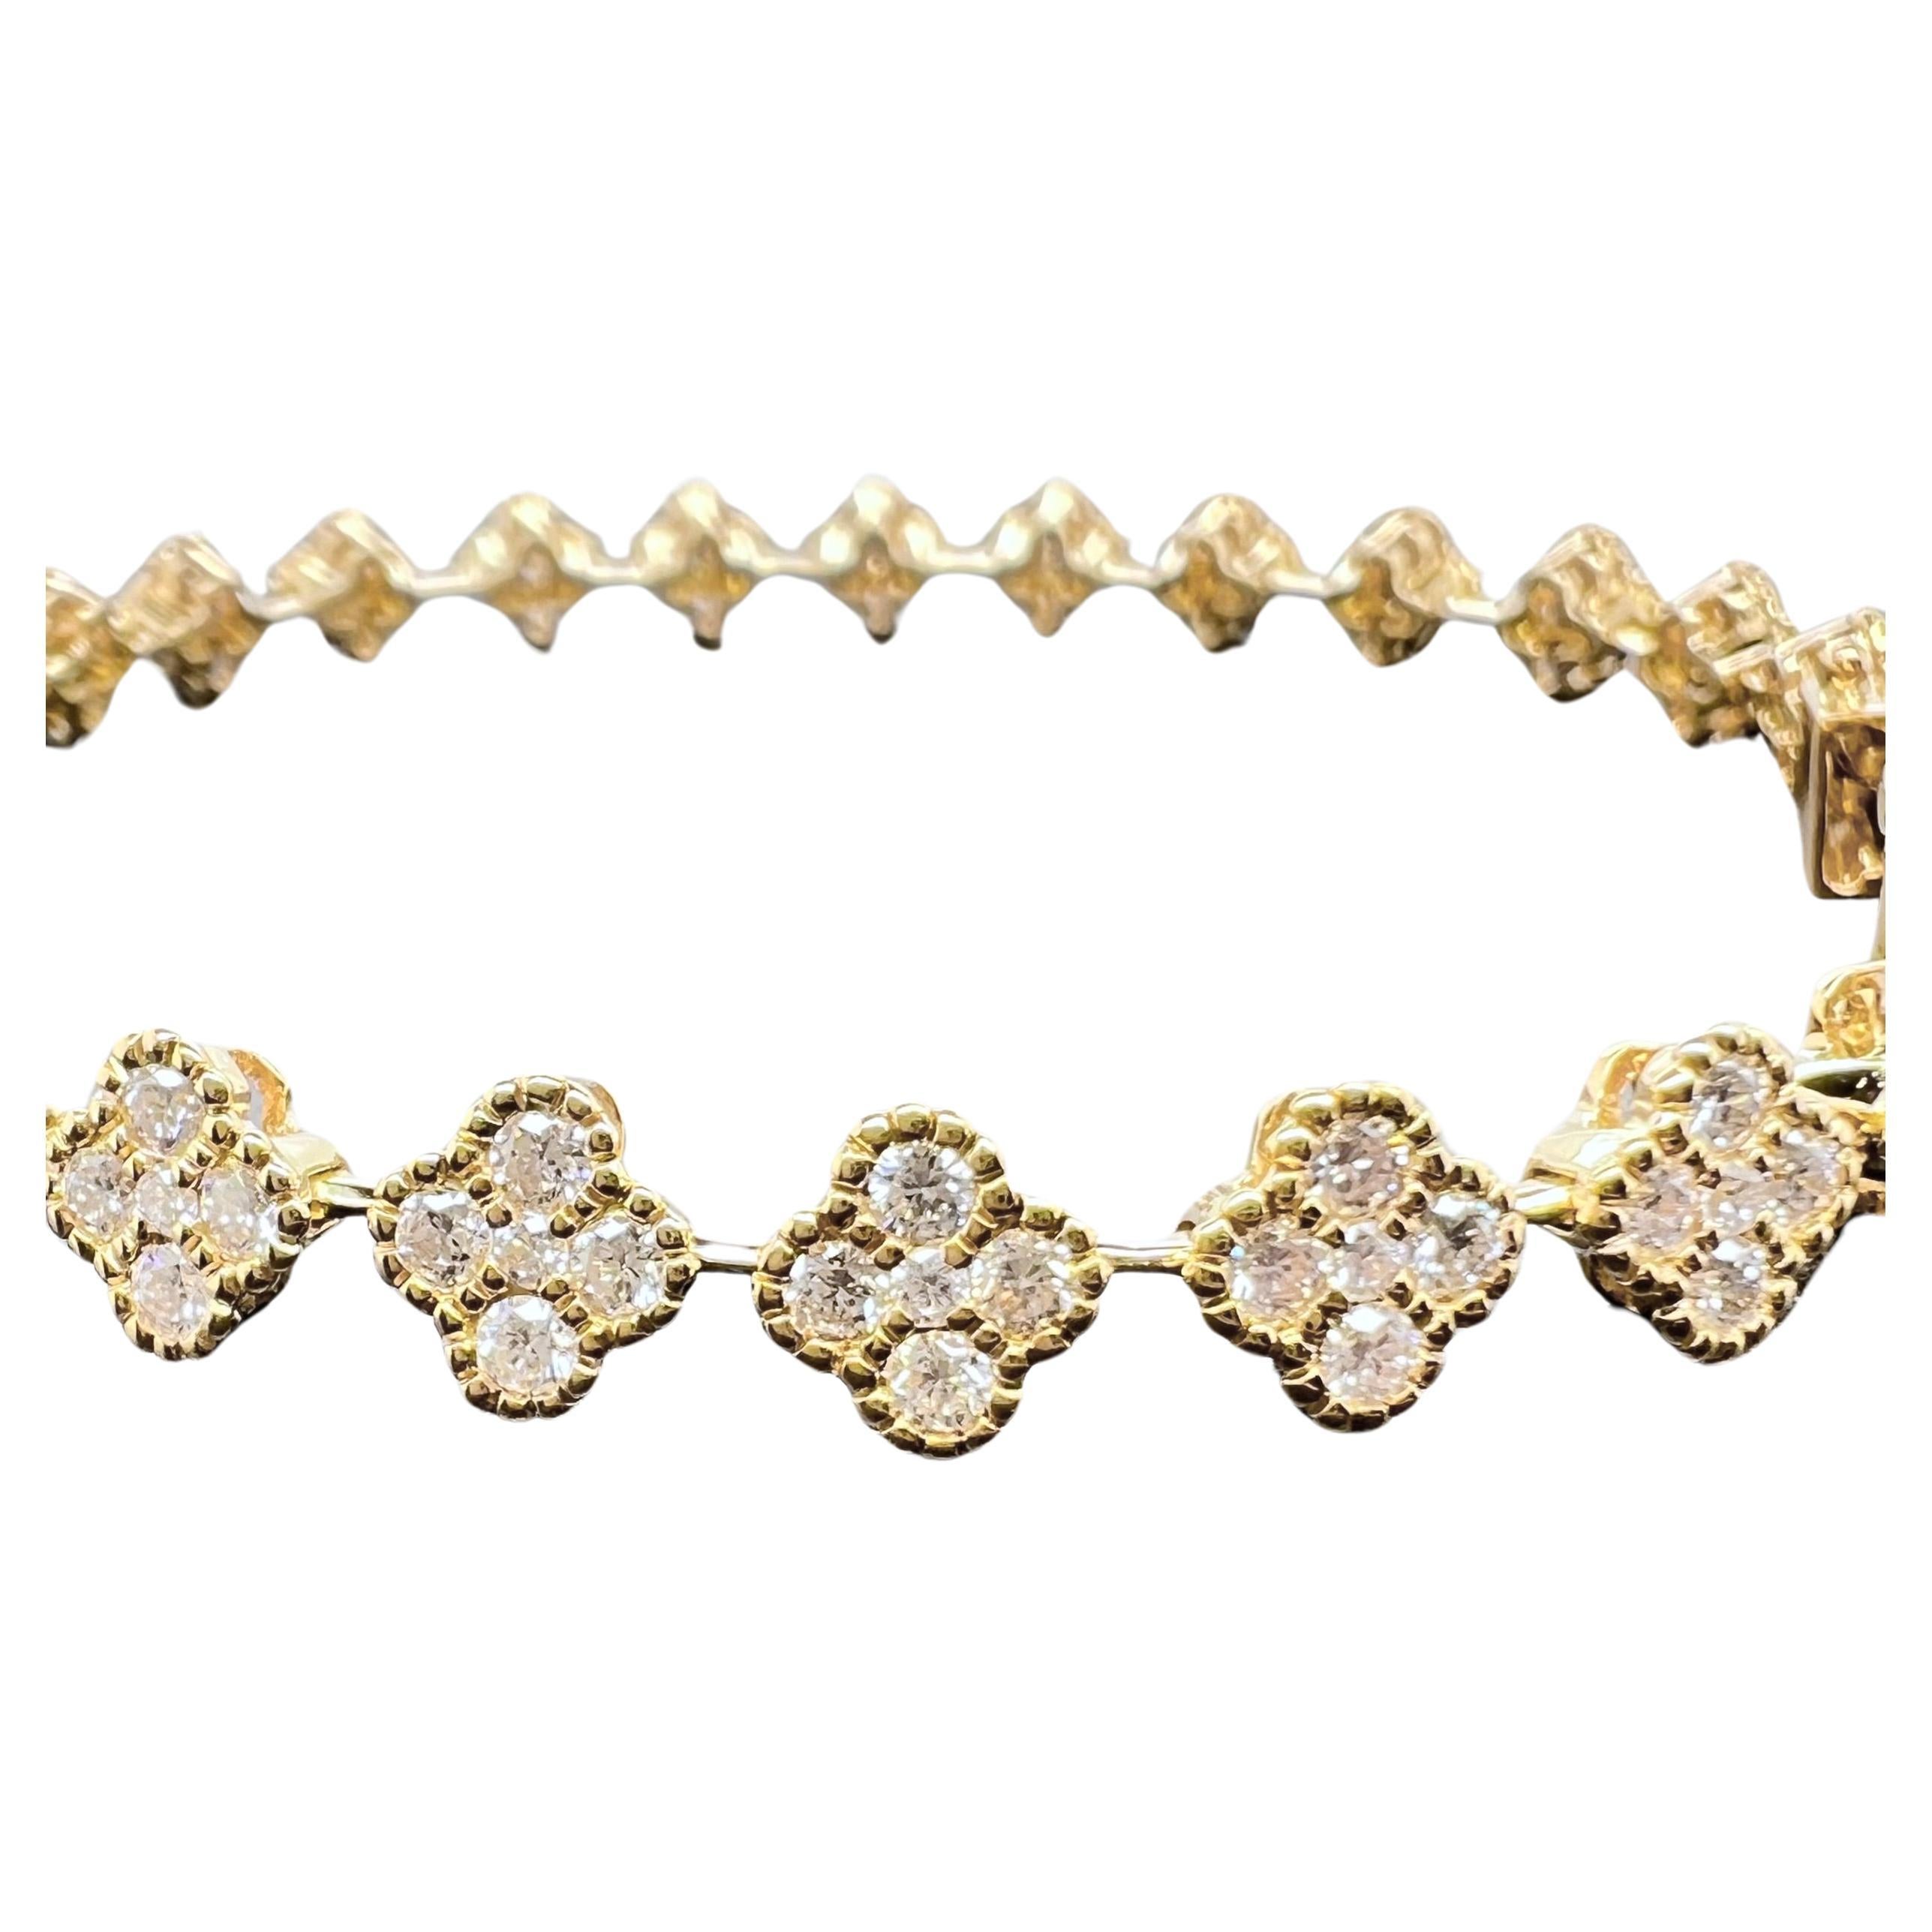 This is absolutely one of our favorite stackable bracelets.  Set in an 18k Yellow Gold, the clover style tennis bracelet is the perfect add on to any stack or can be worn solo.  The round brilliant diamond make up a clover style that is arranged in